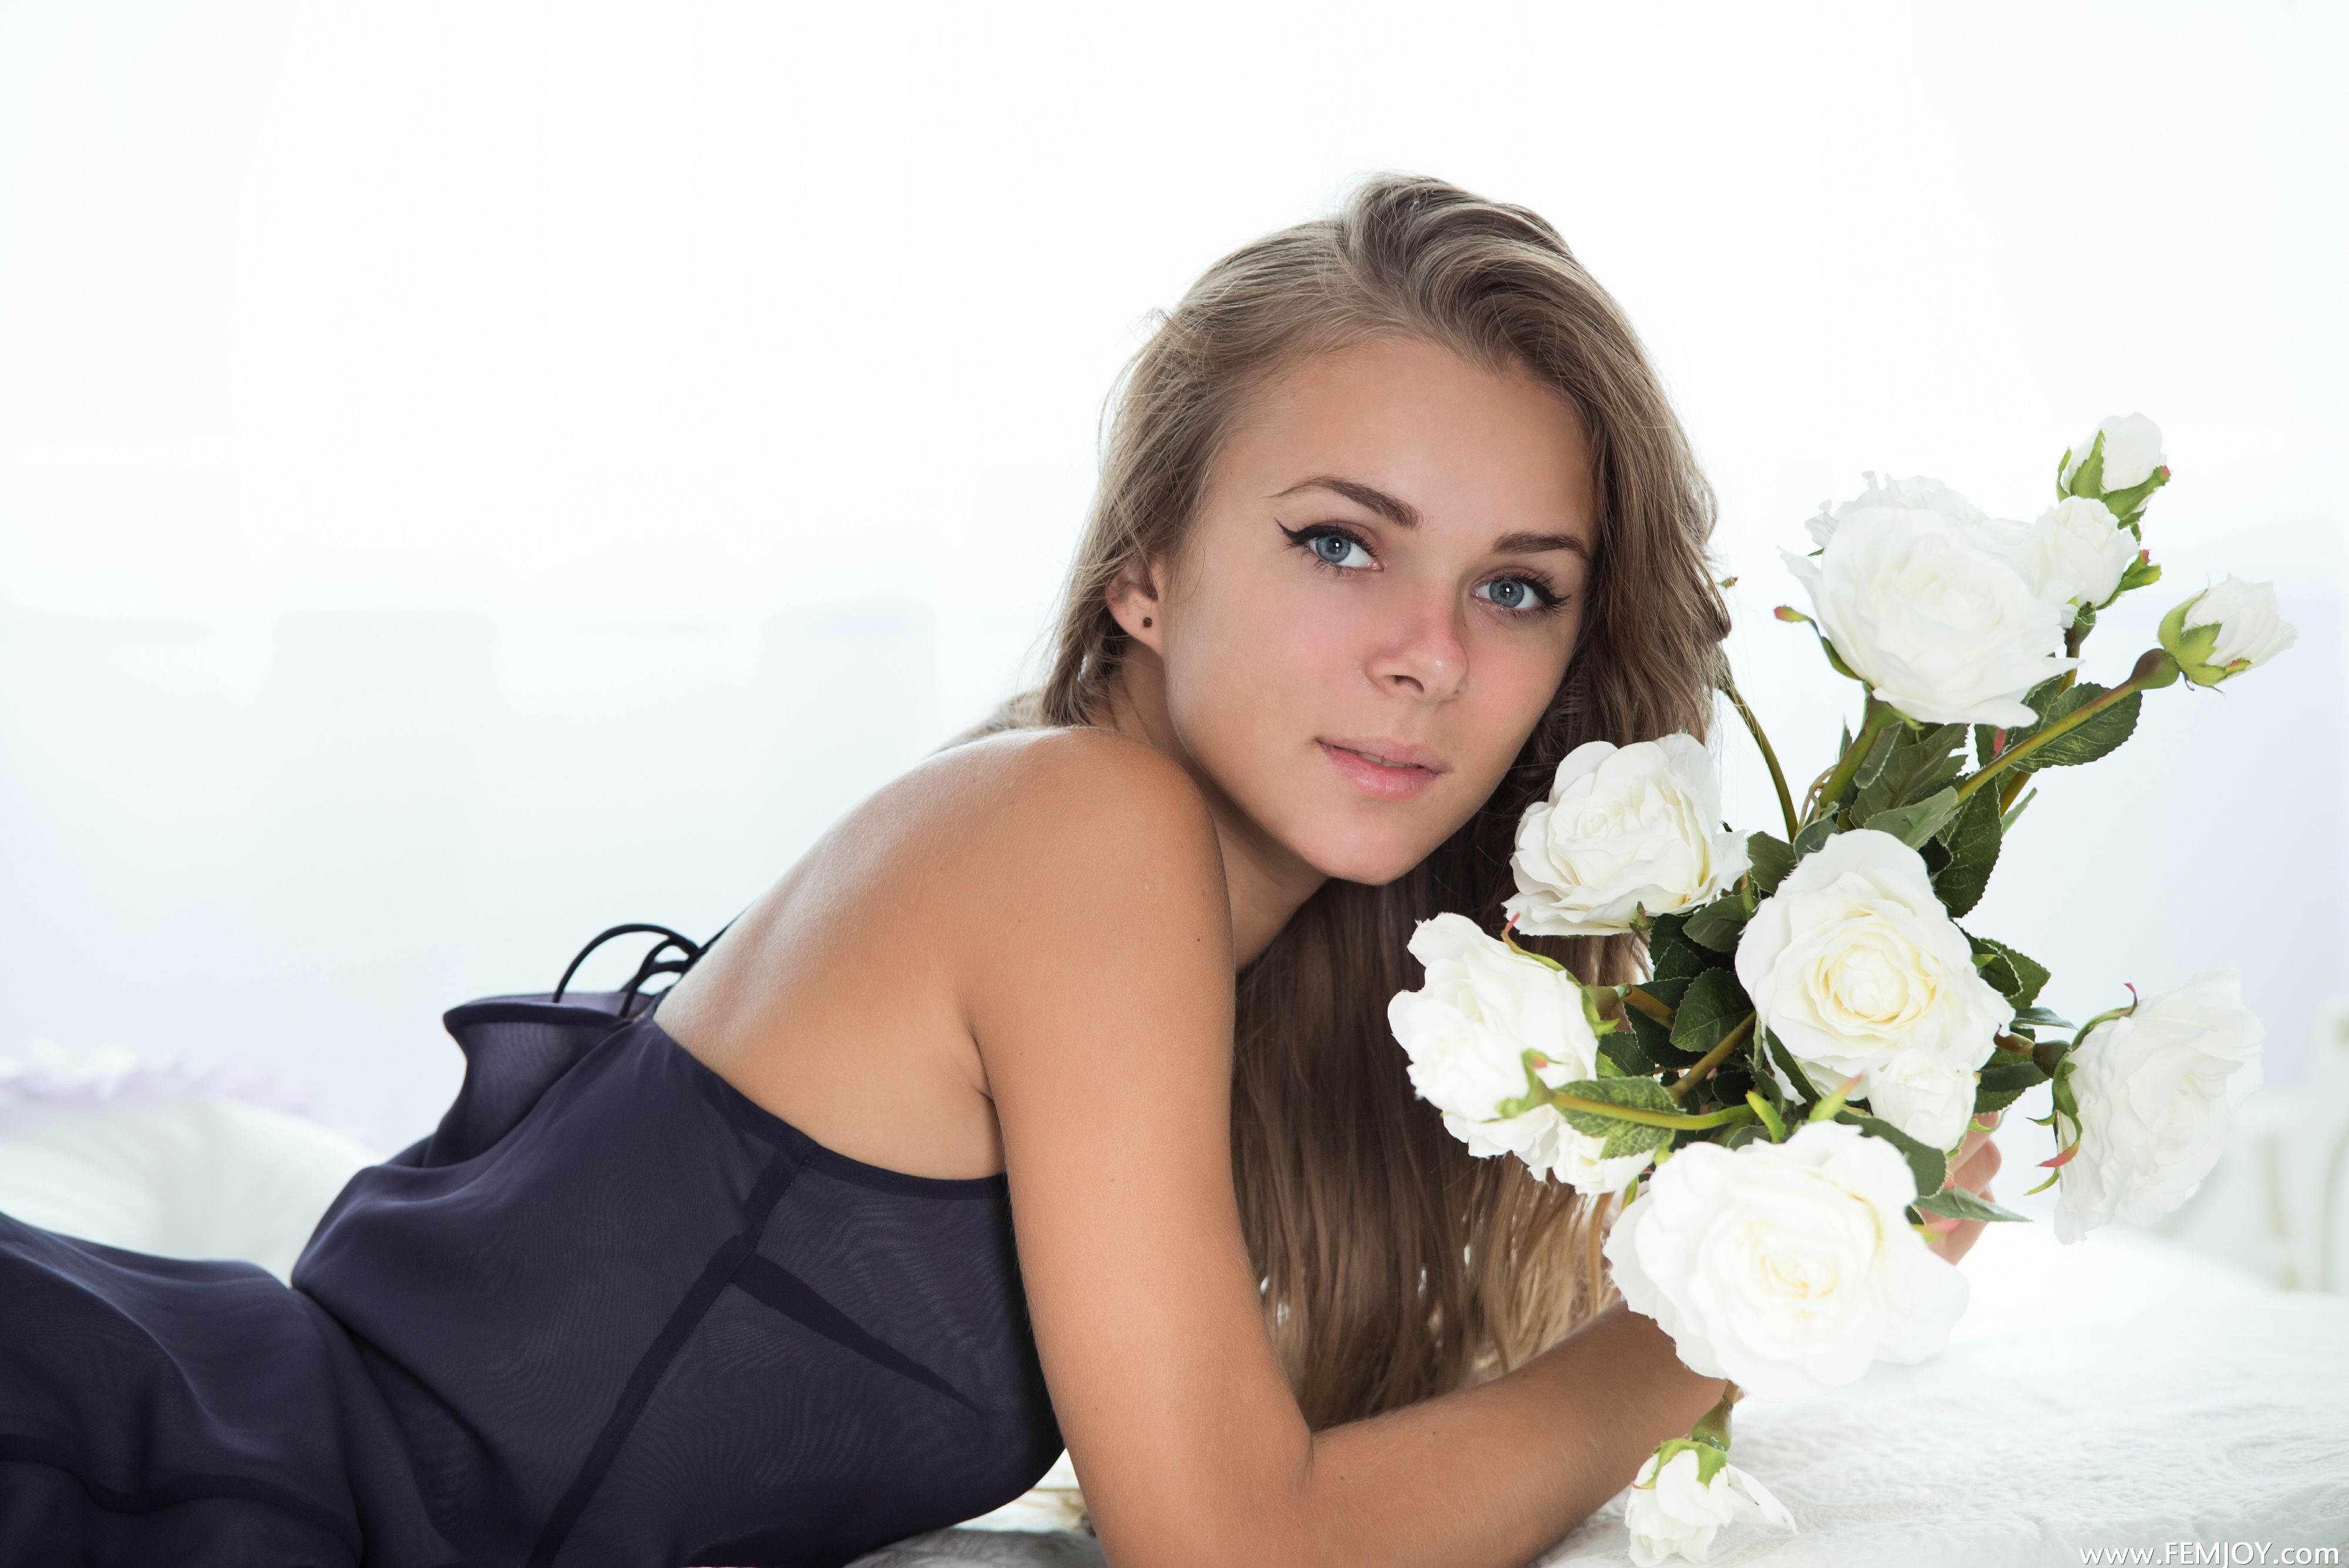 Wallpaper, women, model, blonde, flowers, long hair, blue eyes, looking at viewer, white background, black hair, see through clothing, wedding dress, Person, Femjoy Magazine, Dana P, beauty, woman, bride, hairstyle, gown